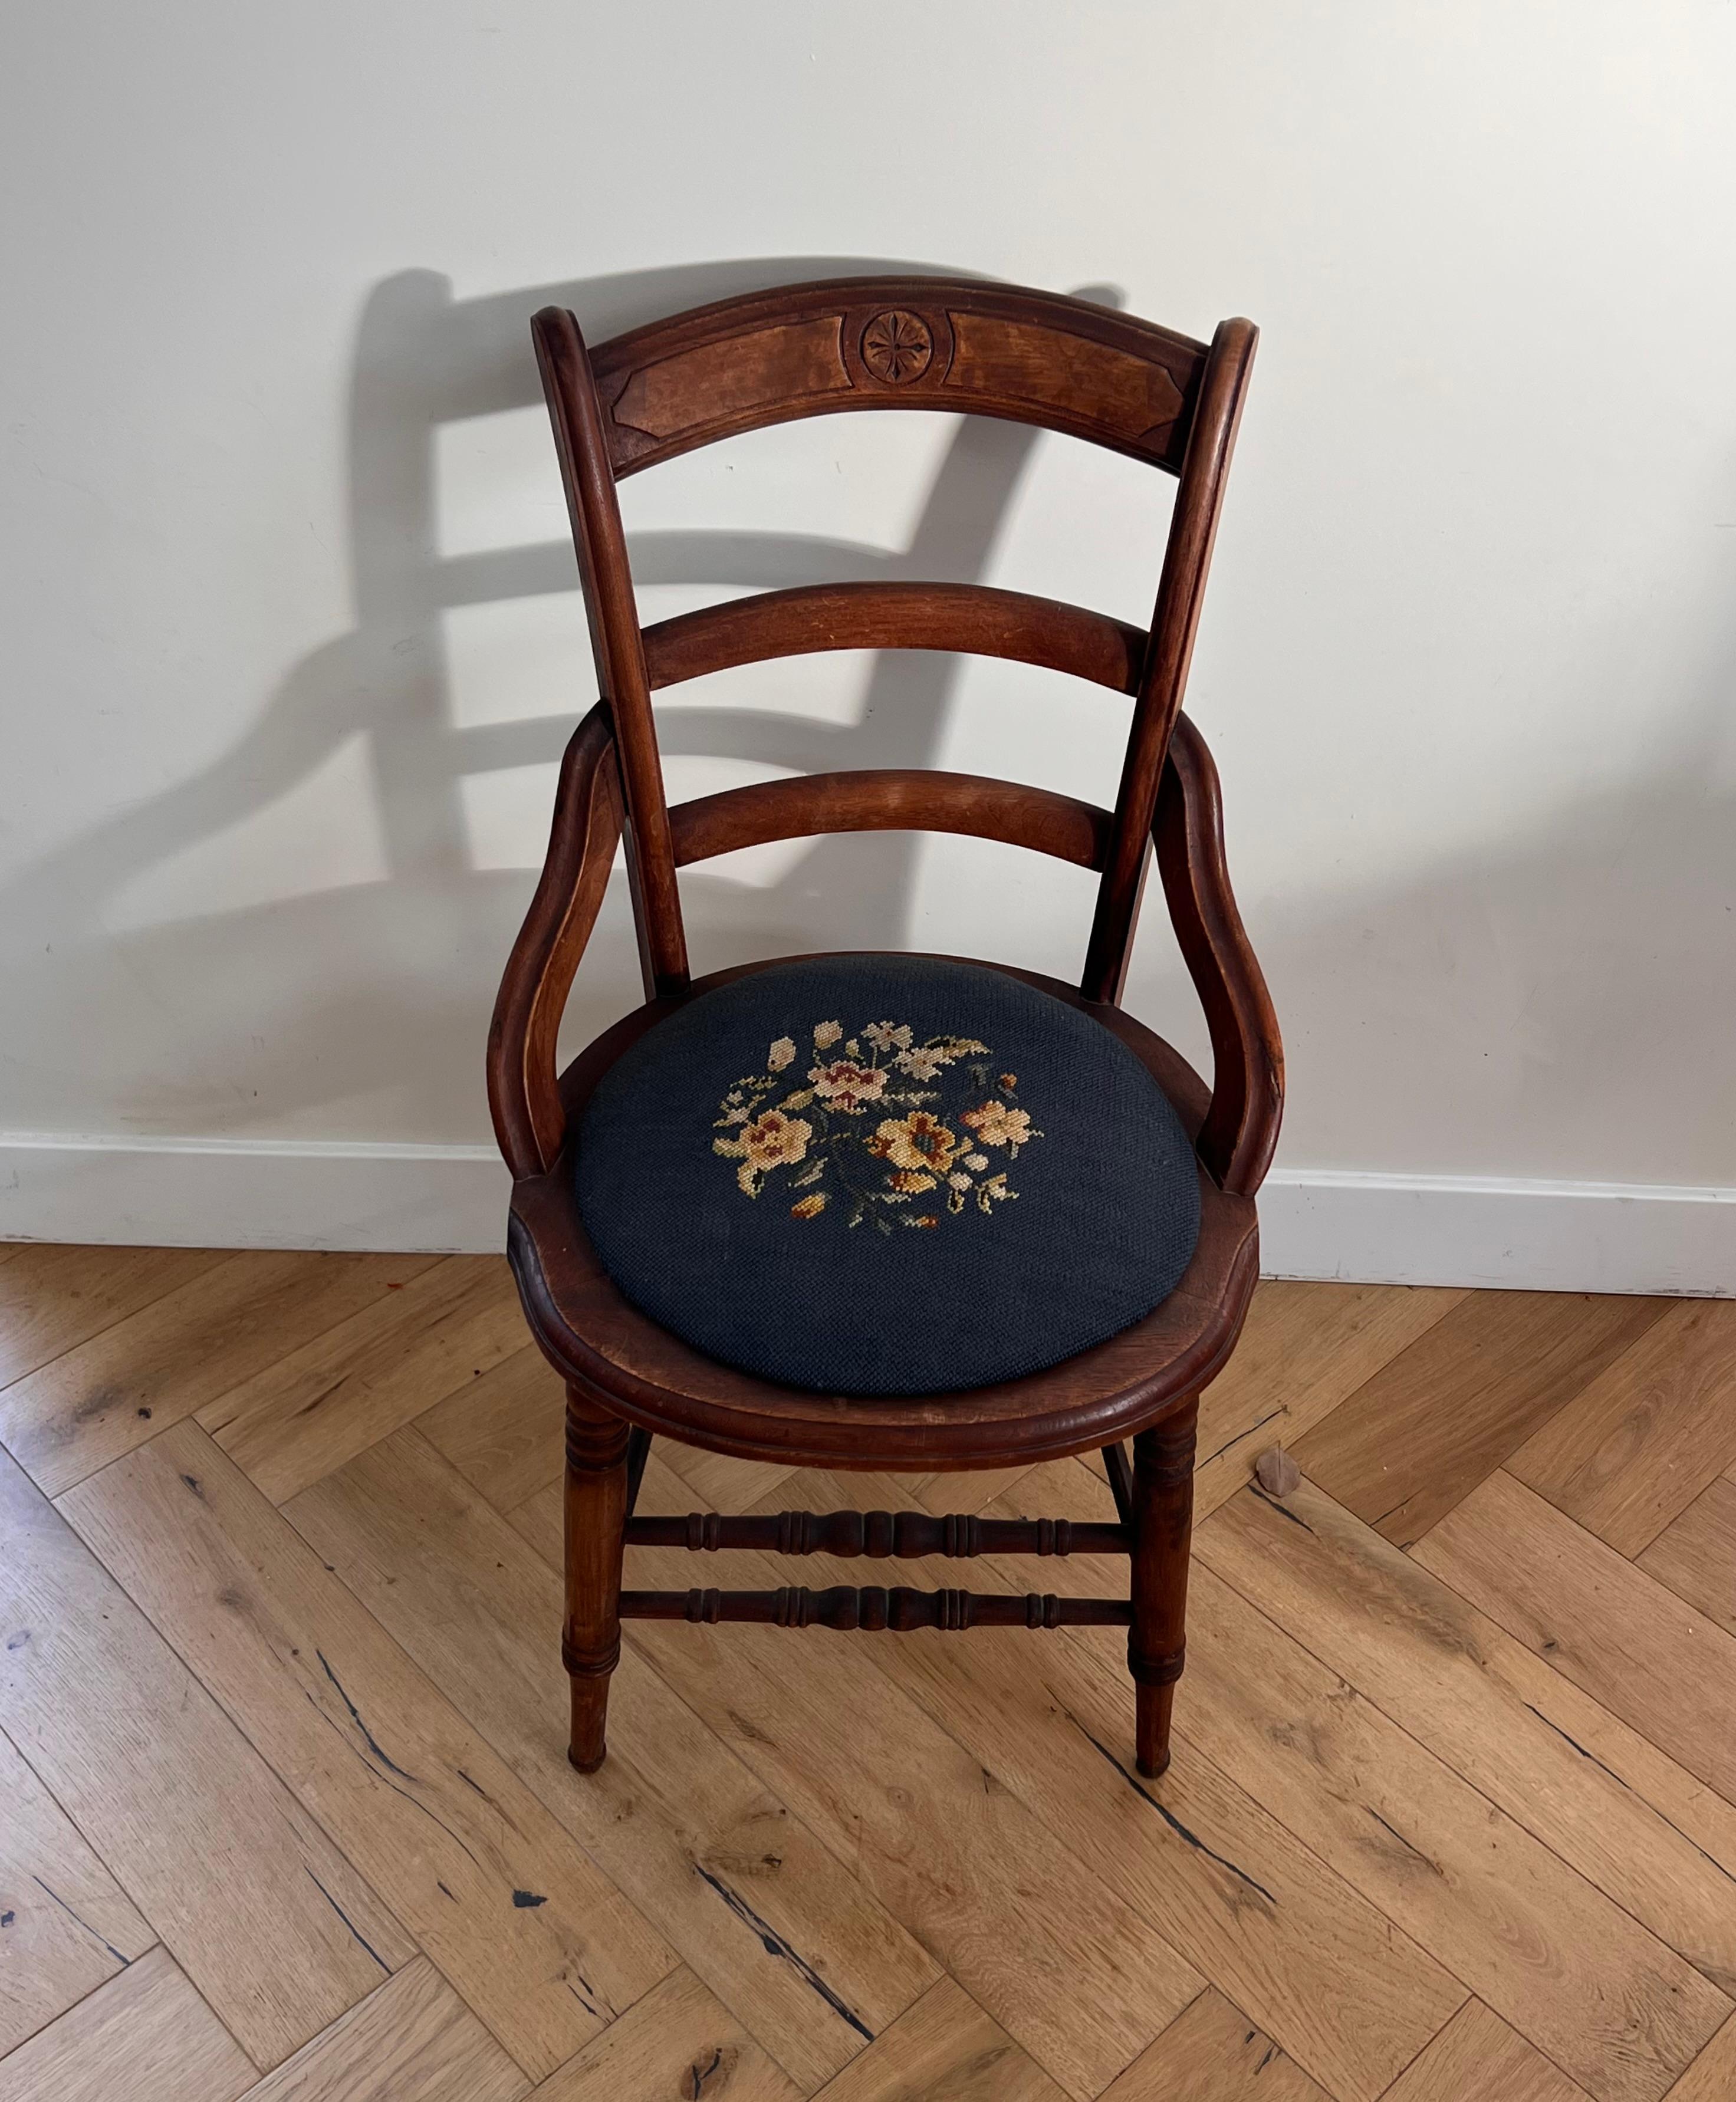 Antique Wooden Chair with Embroidered Needlepoint Seat, Early 20th Century For Sale 6